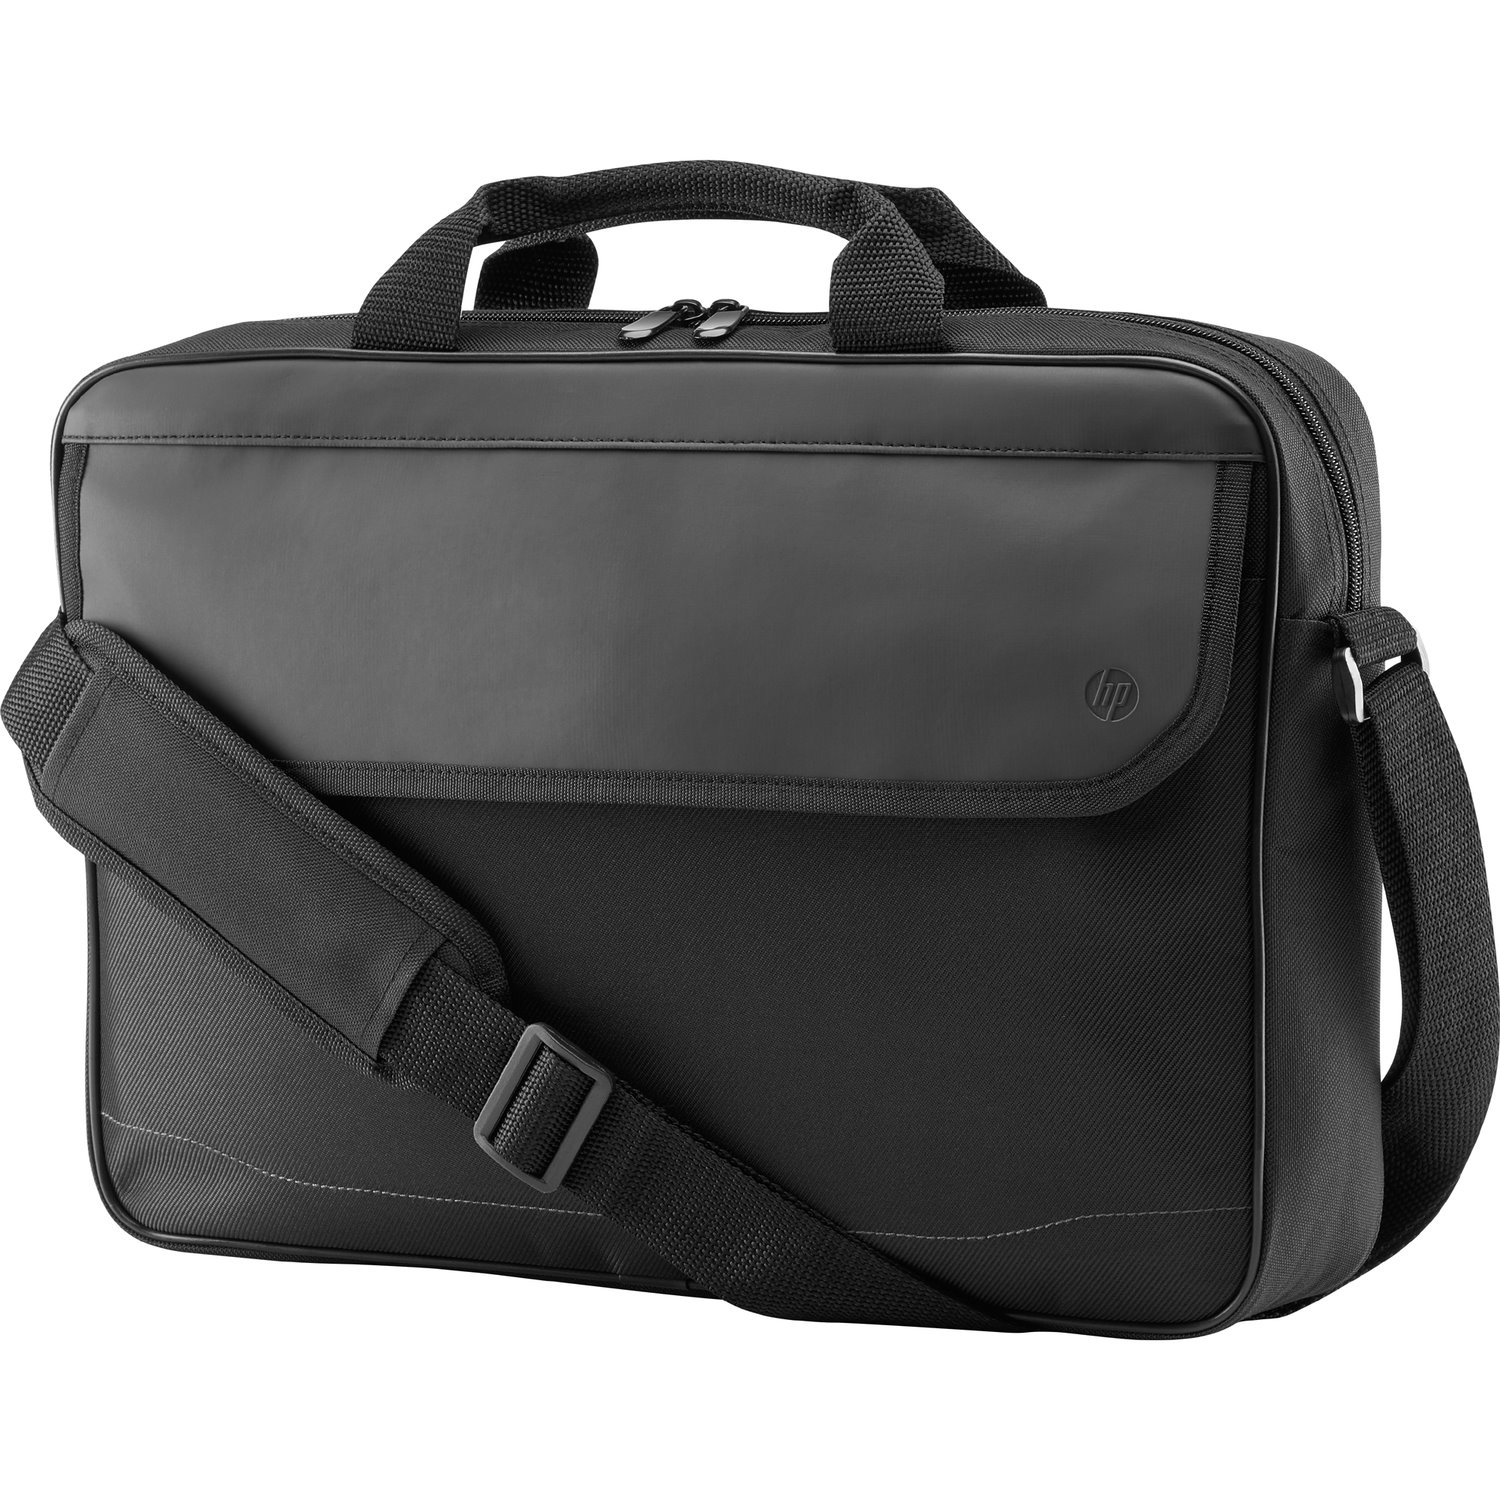 HP Prelude Carrying Case for 33 cm (13") to 39.6 cm (15.6") Notebook - Black